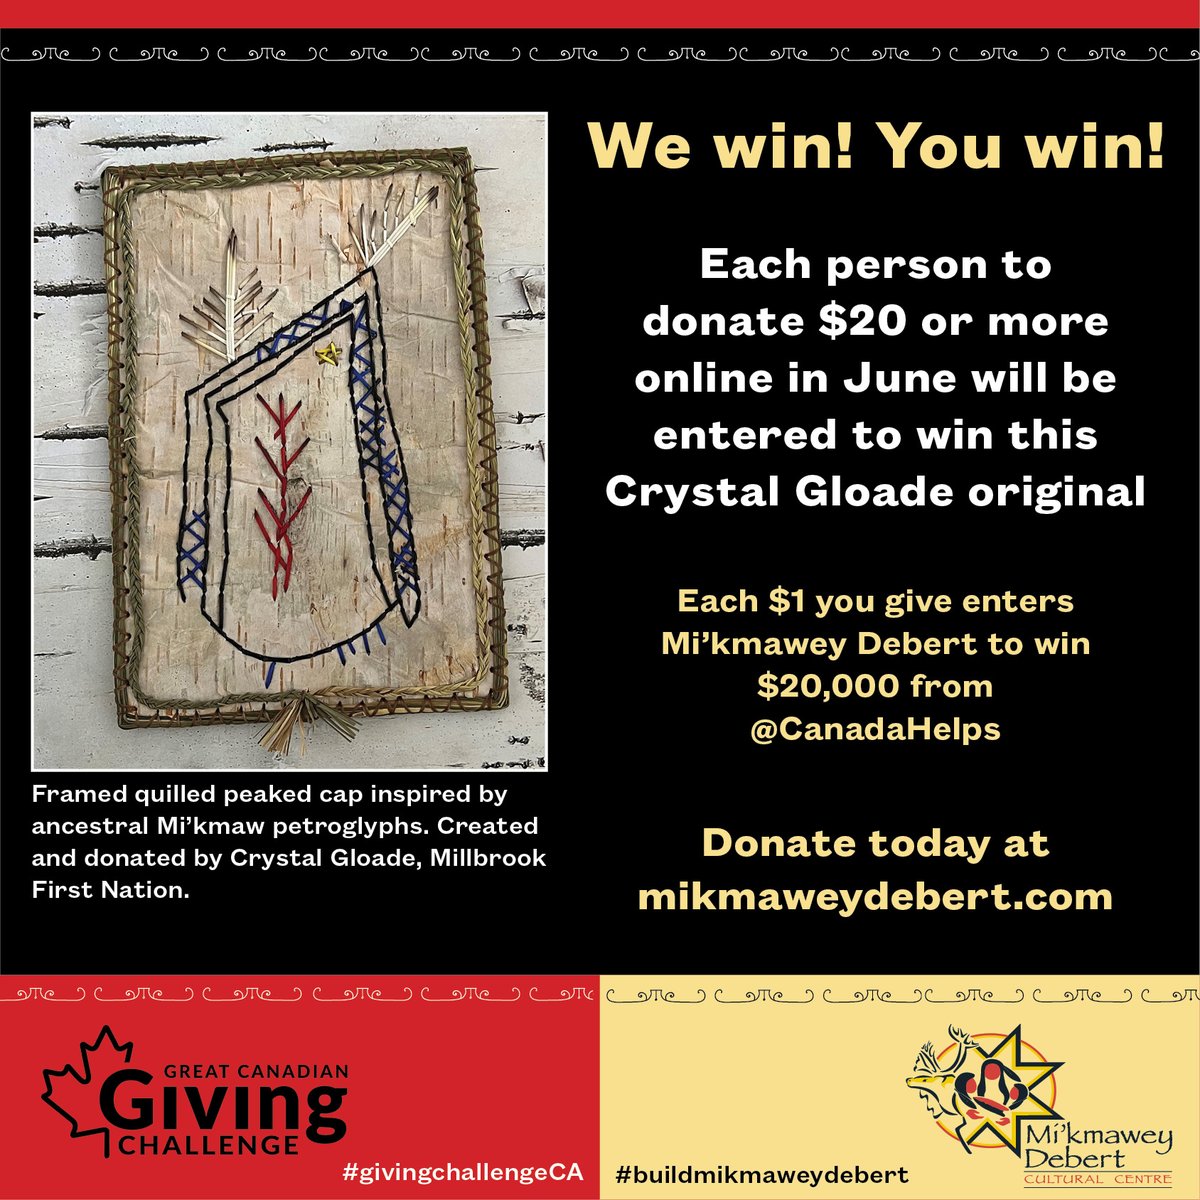 Mi'kmawey Debert is participating in the Great Canadian Giving Challenge, sponsored by Canada Helps! Donate here for a win-win gift! mikmaweydebert.com/donations or EFT to donations@cmmns.com. If you e-transfer, please include your mailing address and the phrase “Mi’kmawey Debert.”